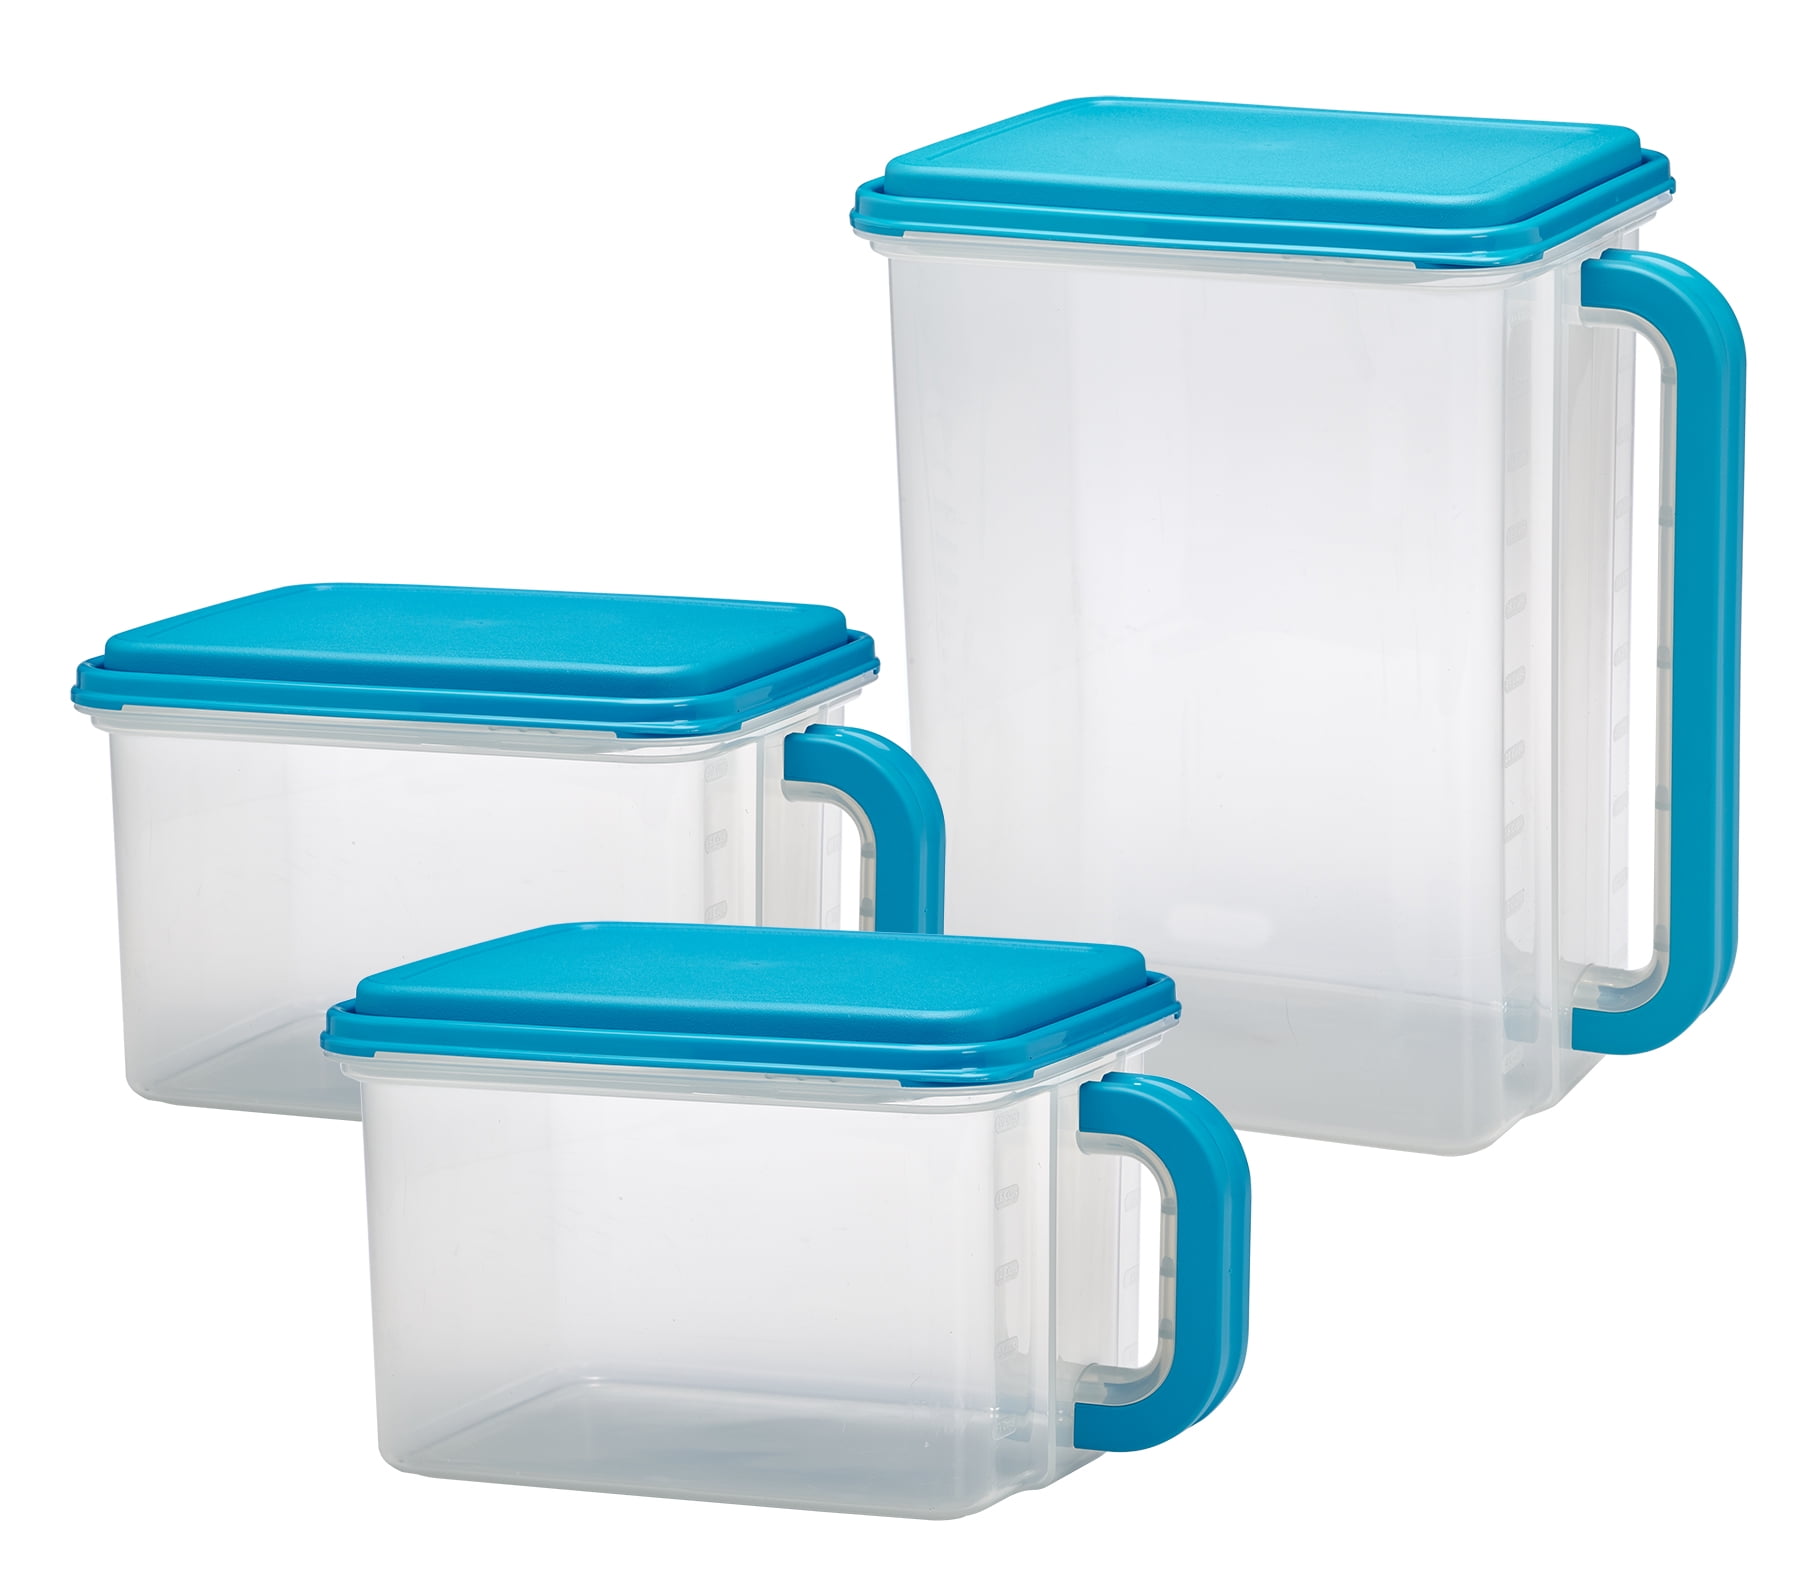 Mainstays Plastic Food Storage Containers with Flip-Top Lids, Set of 3  small medium and large 